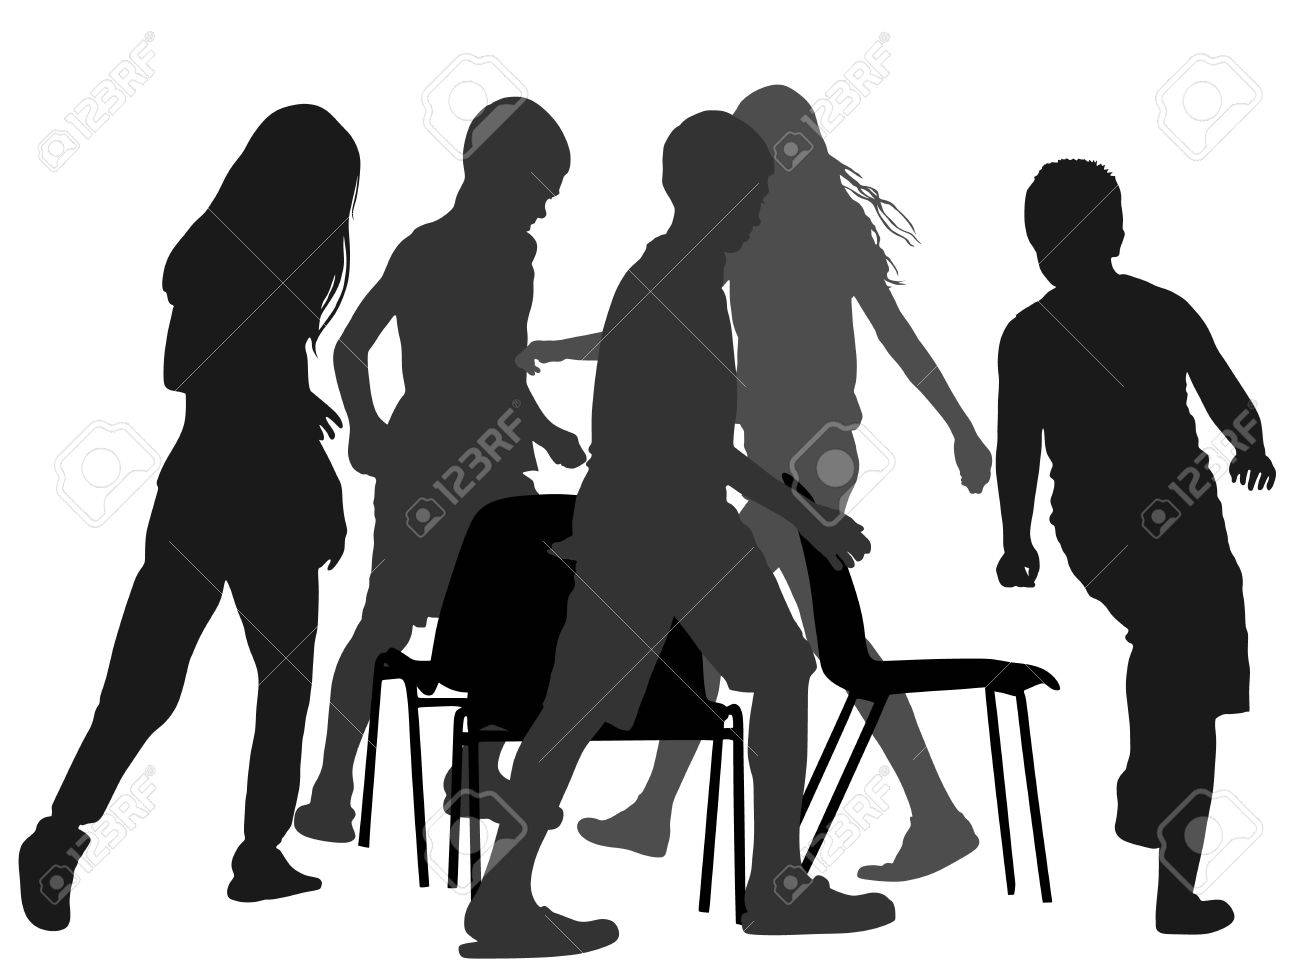 Children playing music chair game, vector silhouette illustration.